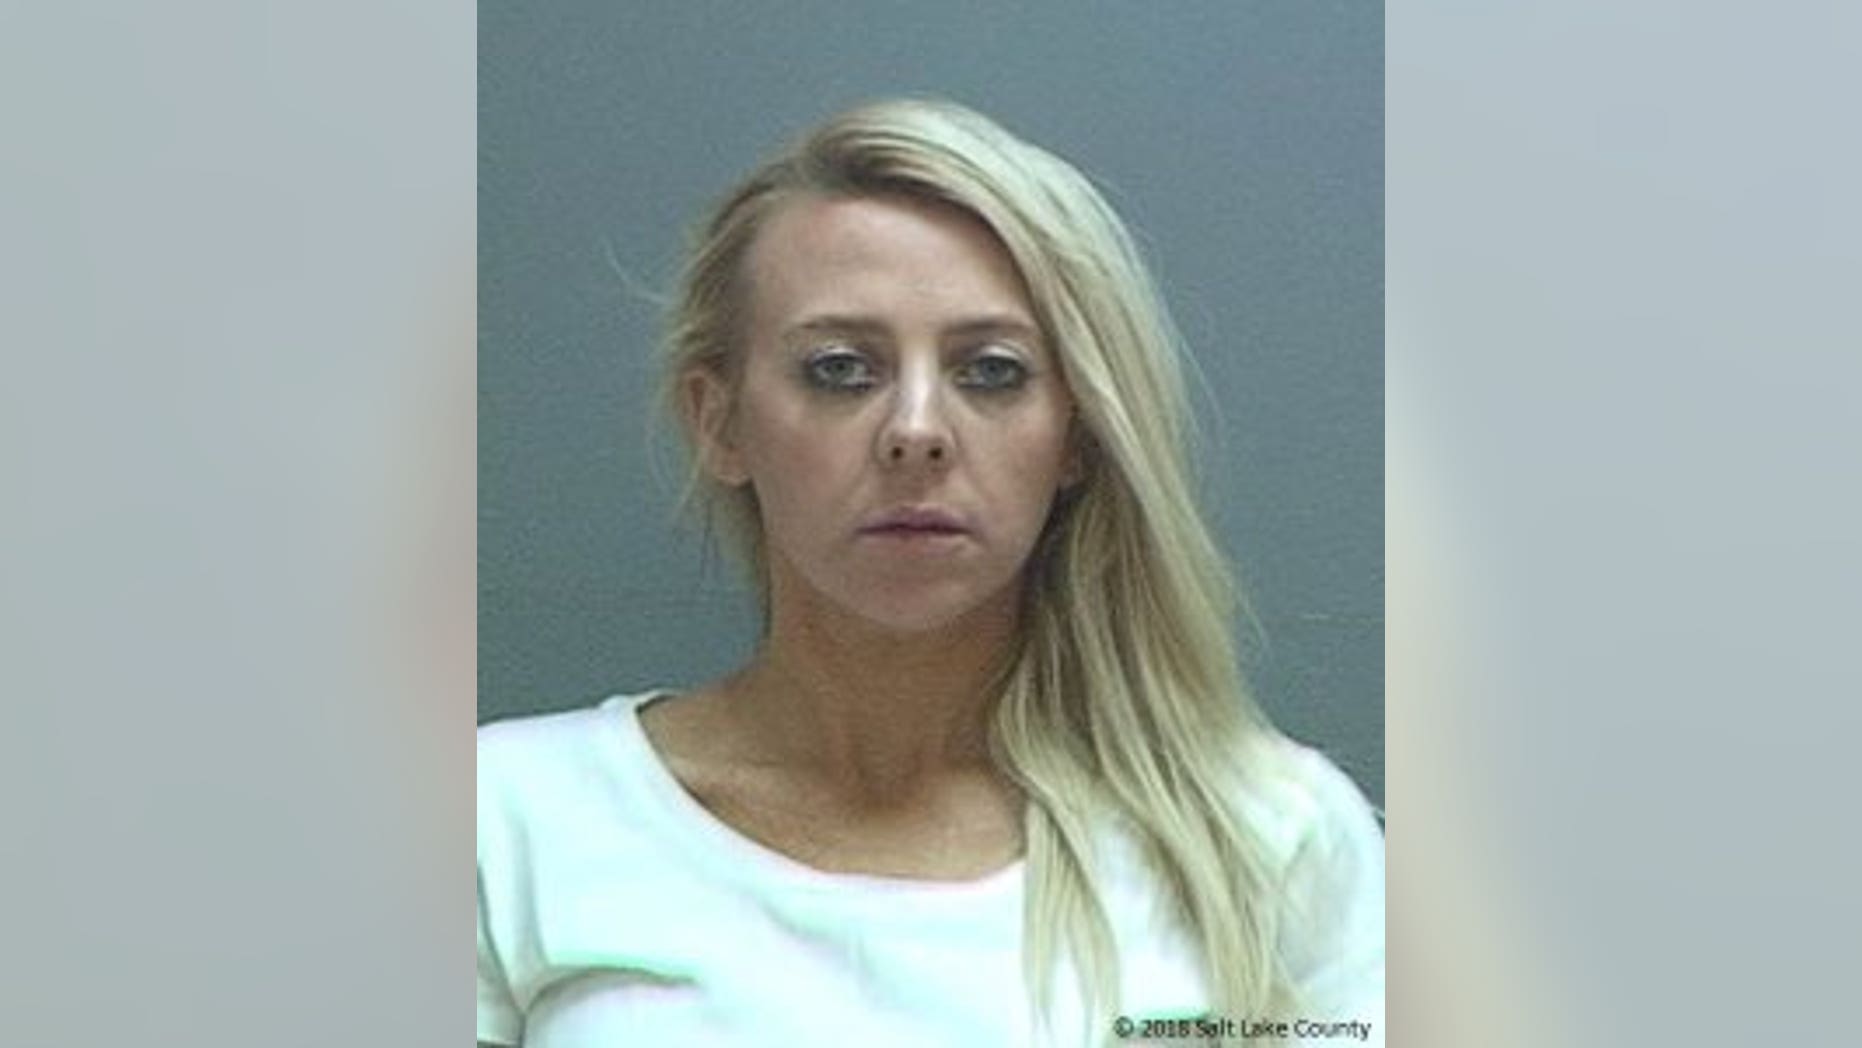 Chelsea Watrous Cook, 32, was booked on one count of first-degree aggravated murder for allegedly killing her ex-husband's girlfriend.